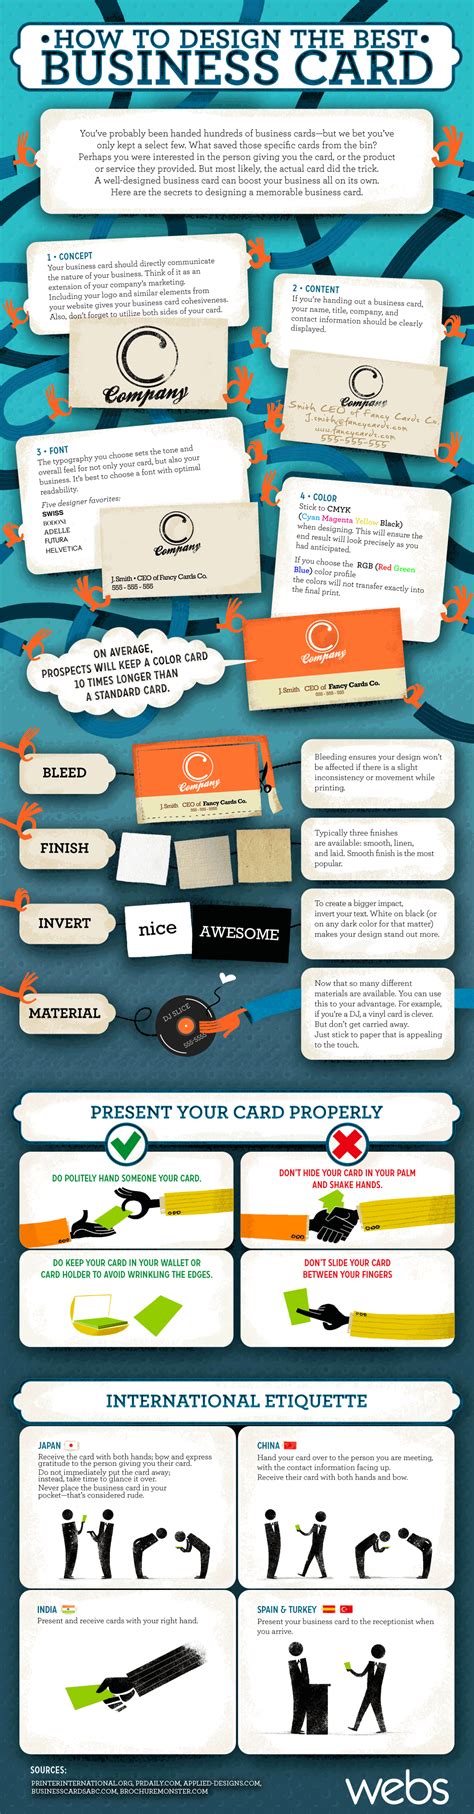 Find the best card for your needs. How to Design the Best Business Card | Visual.ly